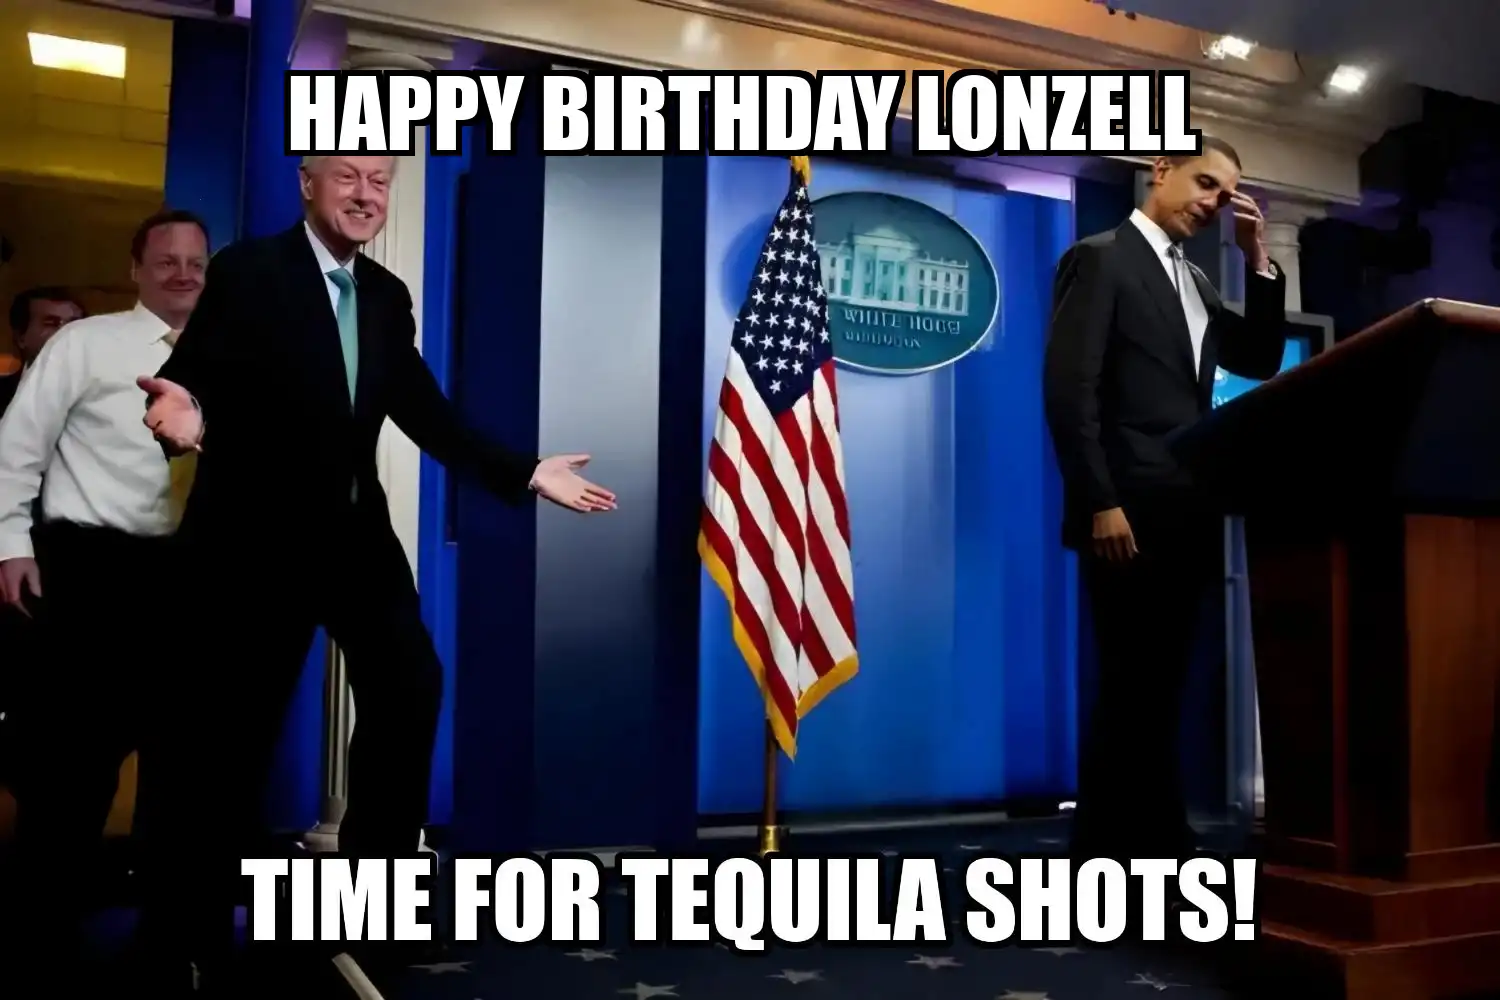 Happy Birthday Lonzell Time For Tequila Shots Memes